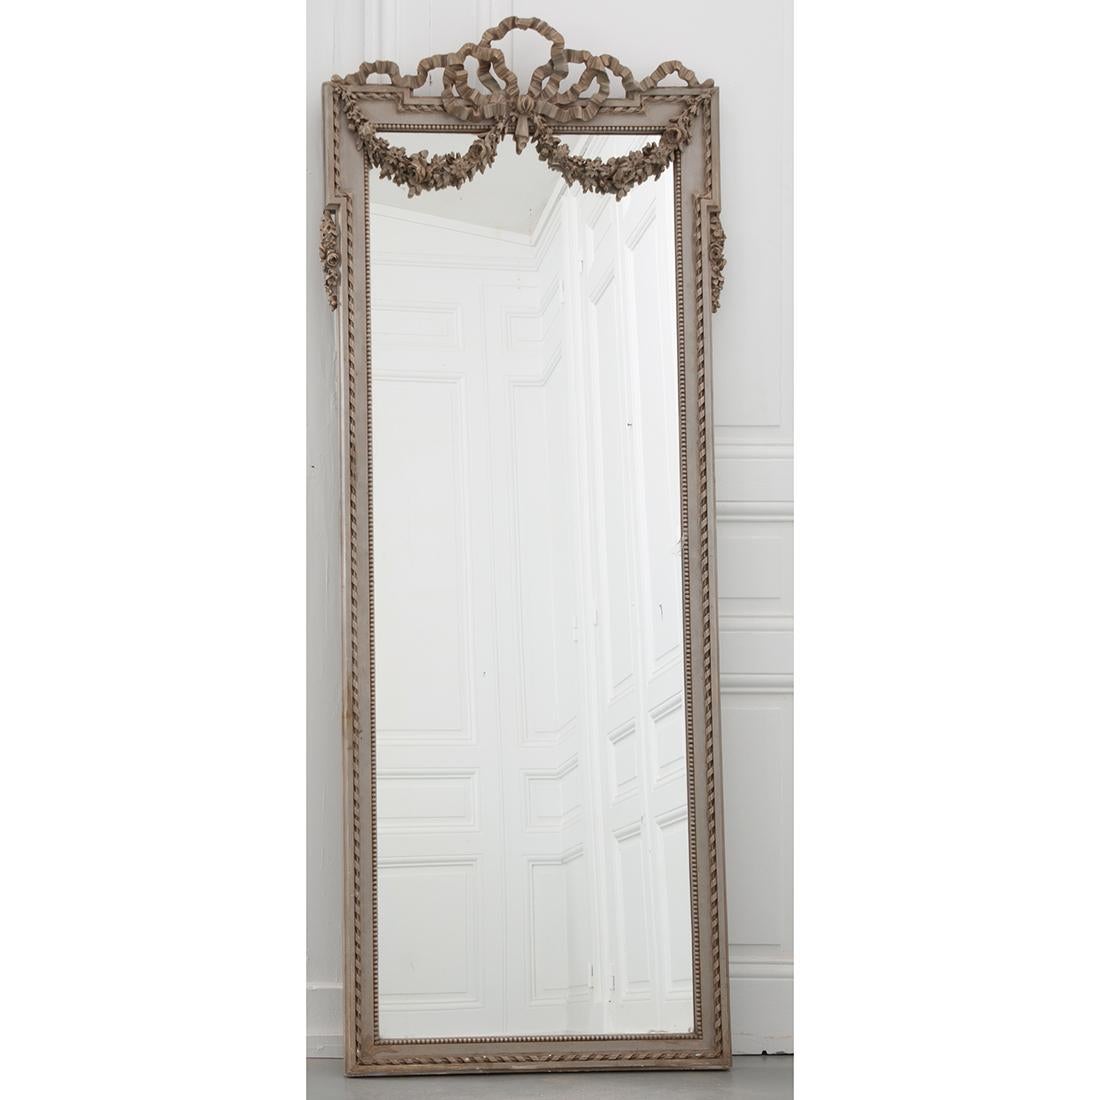 French Louis XVI style painted mirror with original mercury glass. Absolutely stunning designs on this tall, gray/green mirror. Elegant ribbons flow across the top of the mirror frame while floral swags drape over the top of the mirror. The frame is